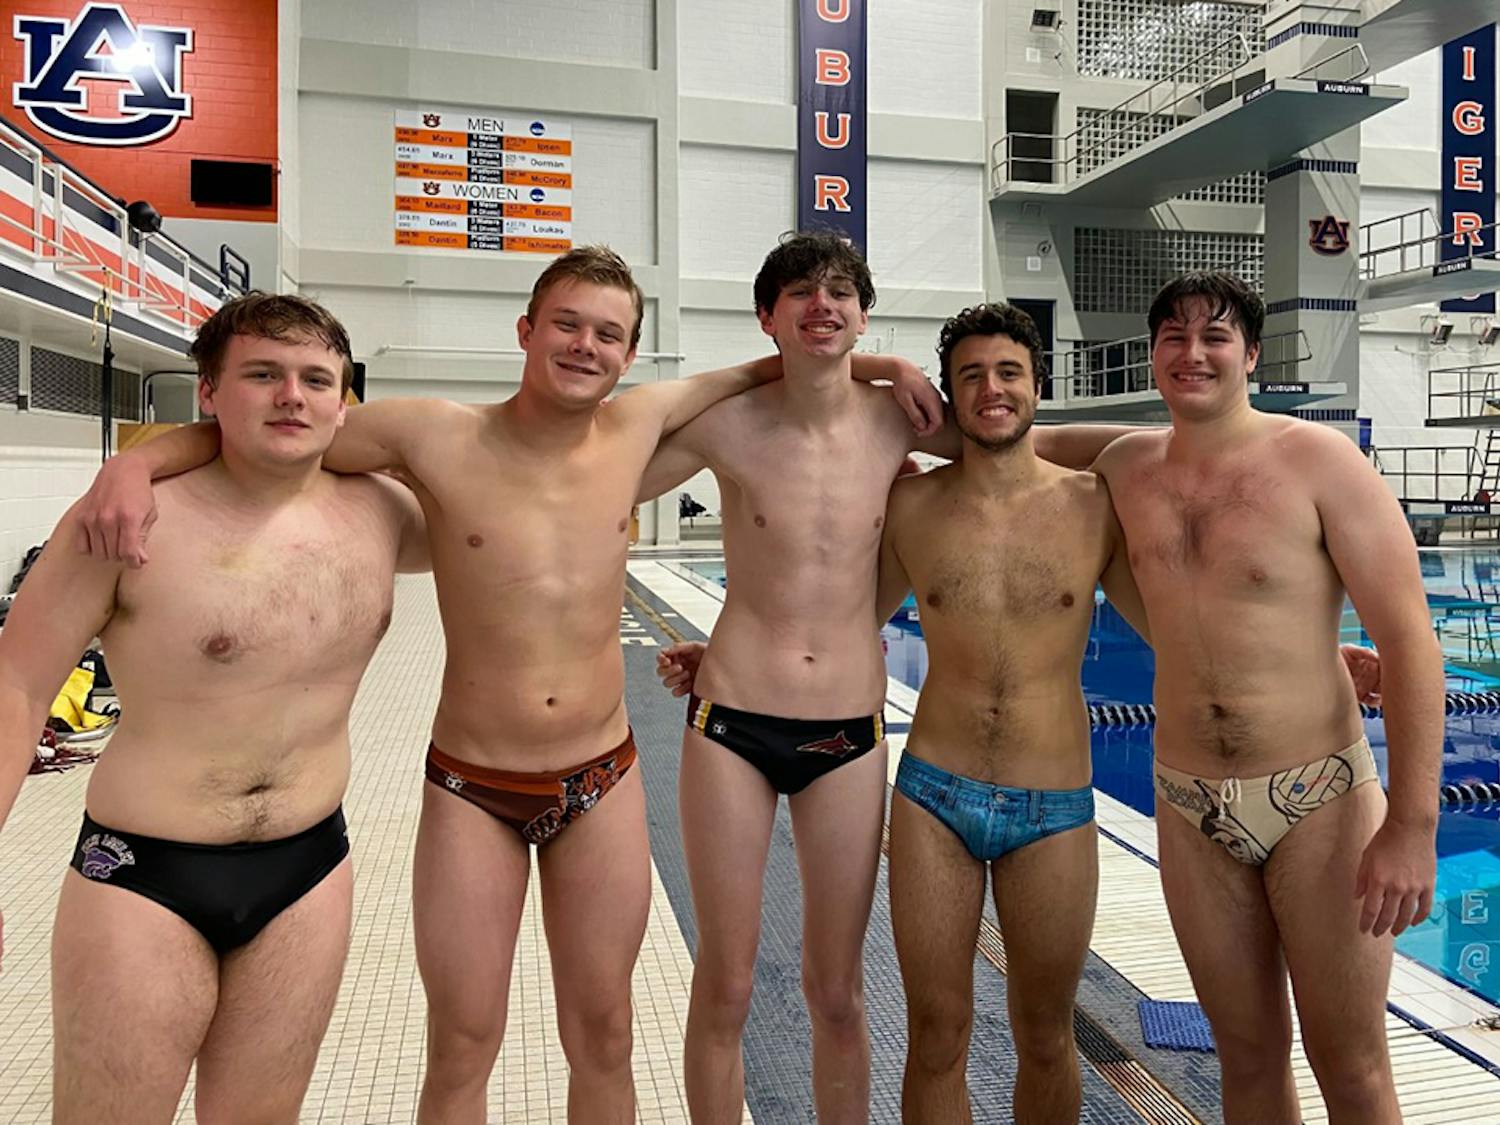 FILE — The Gamecock Water Polo Club at Auburn University for the Chris Young Tournament on Jan 29, 2022.